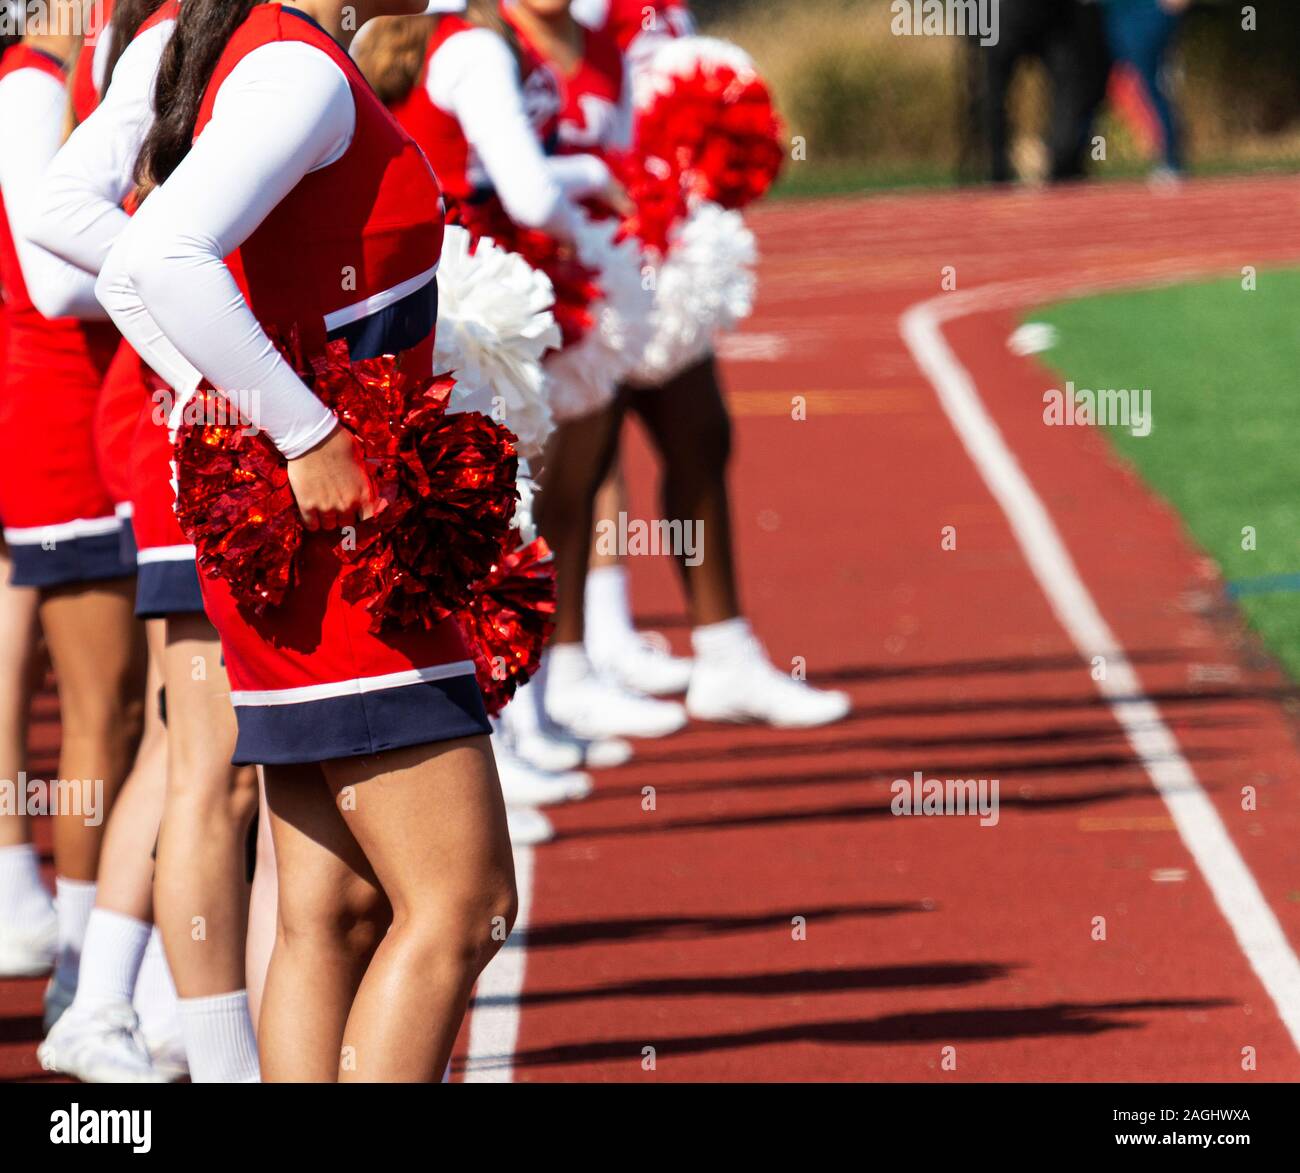 High school cheerleaders standing on the track holding red and white pom poms while watching the football game. Stock Photo